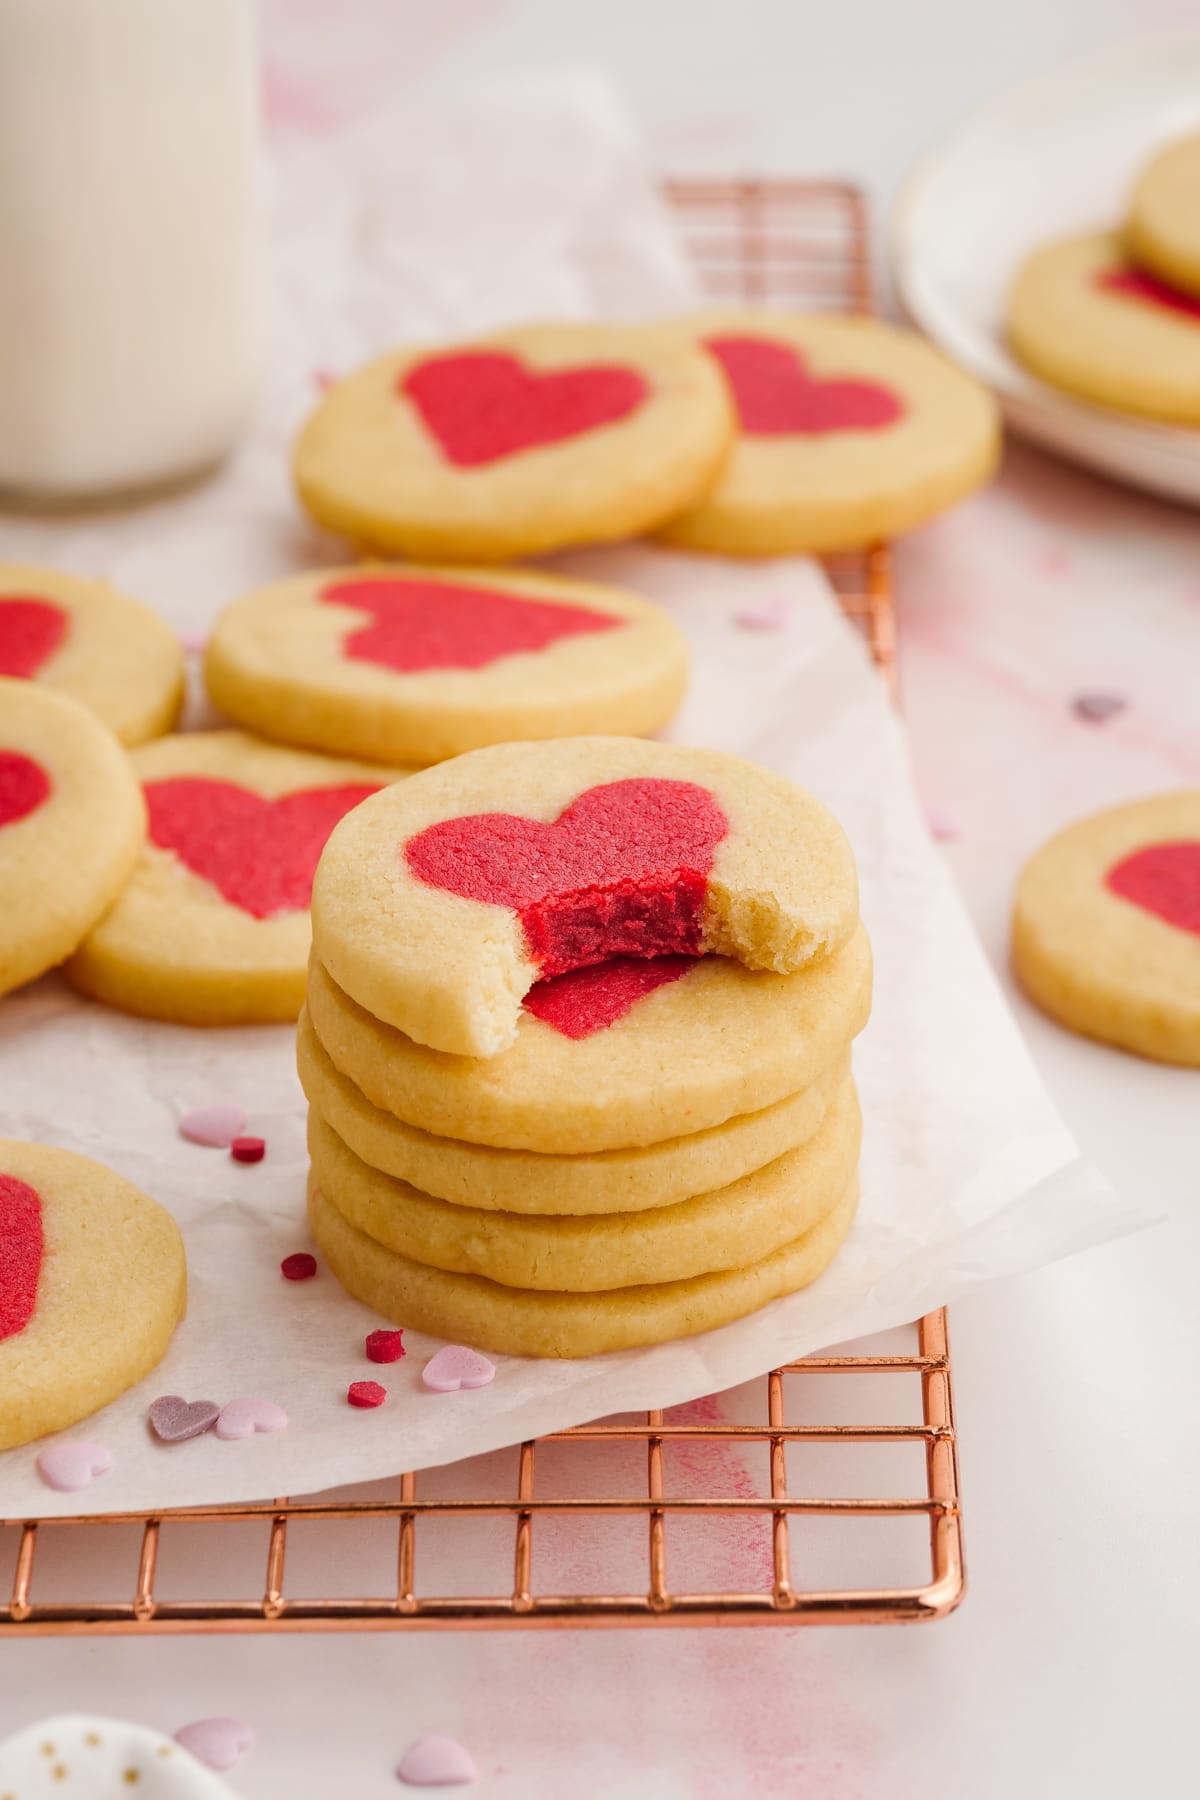 stacked valentines cookies, top cookie has a bite missing